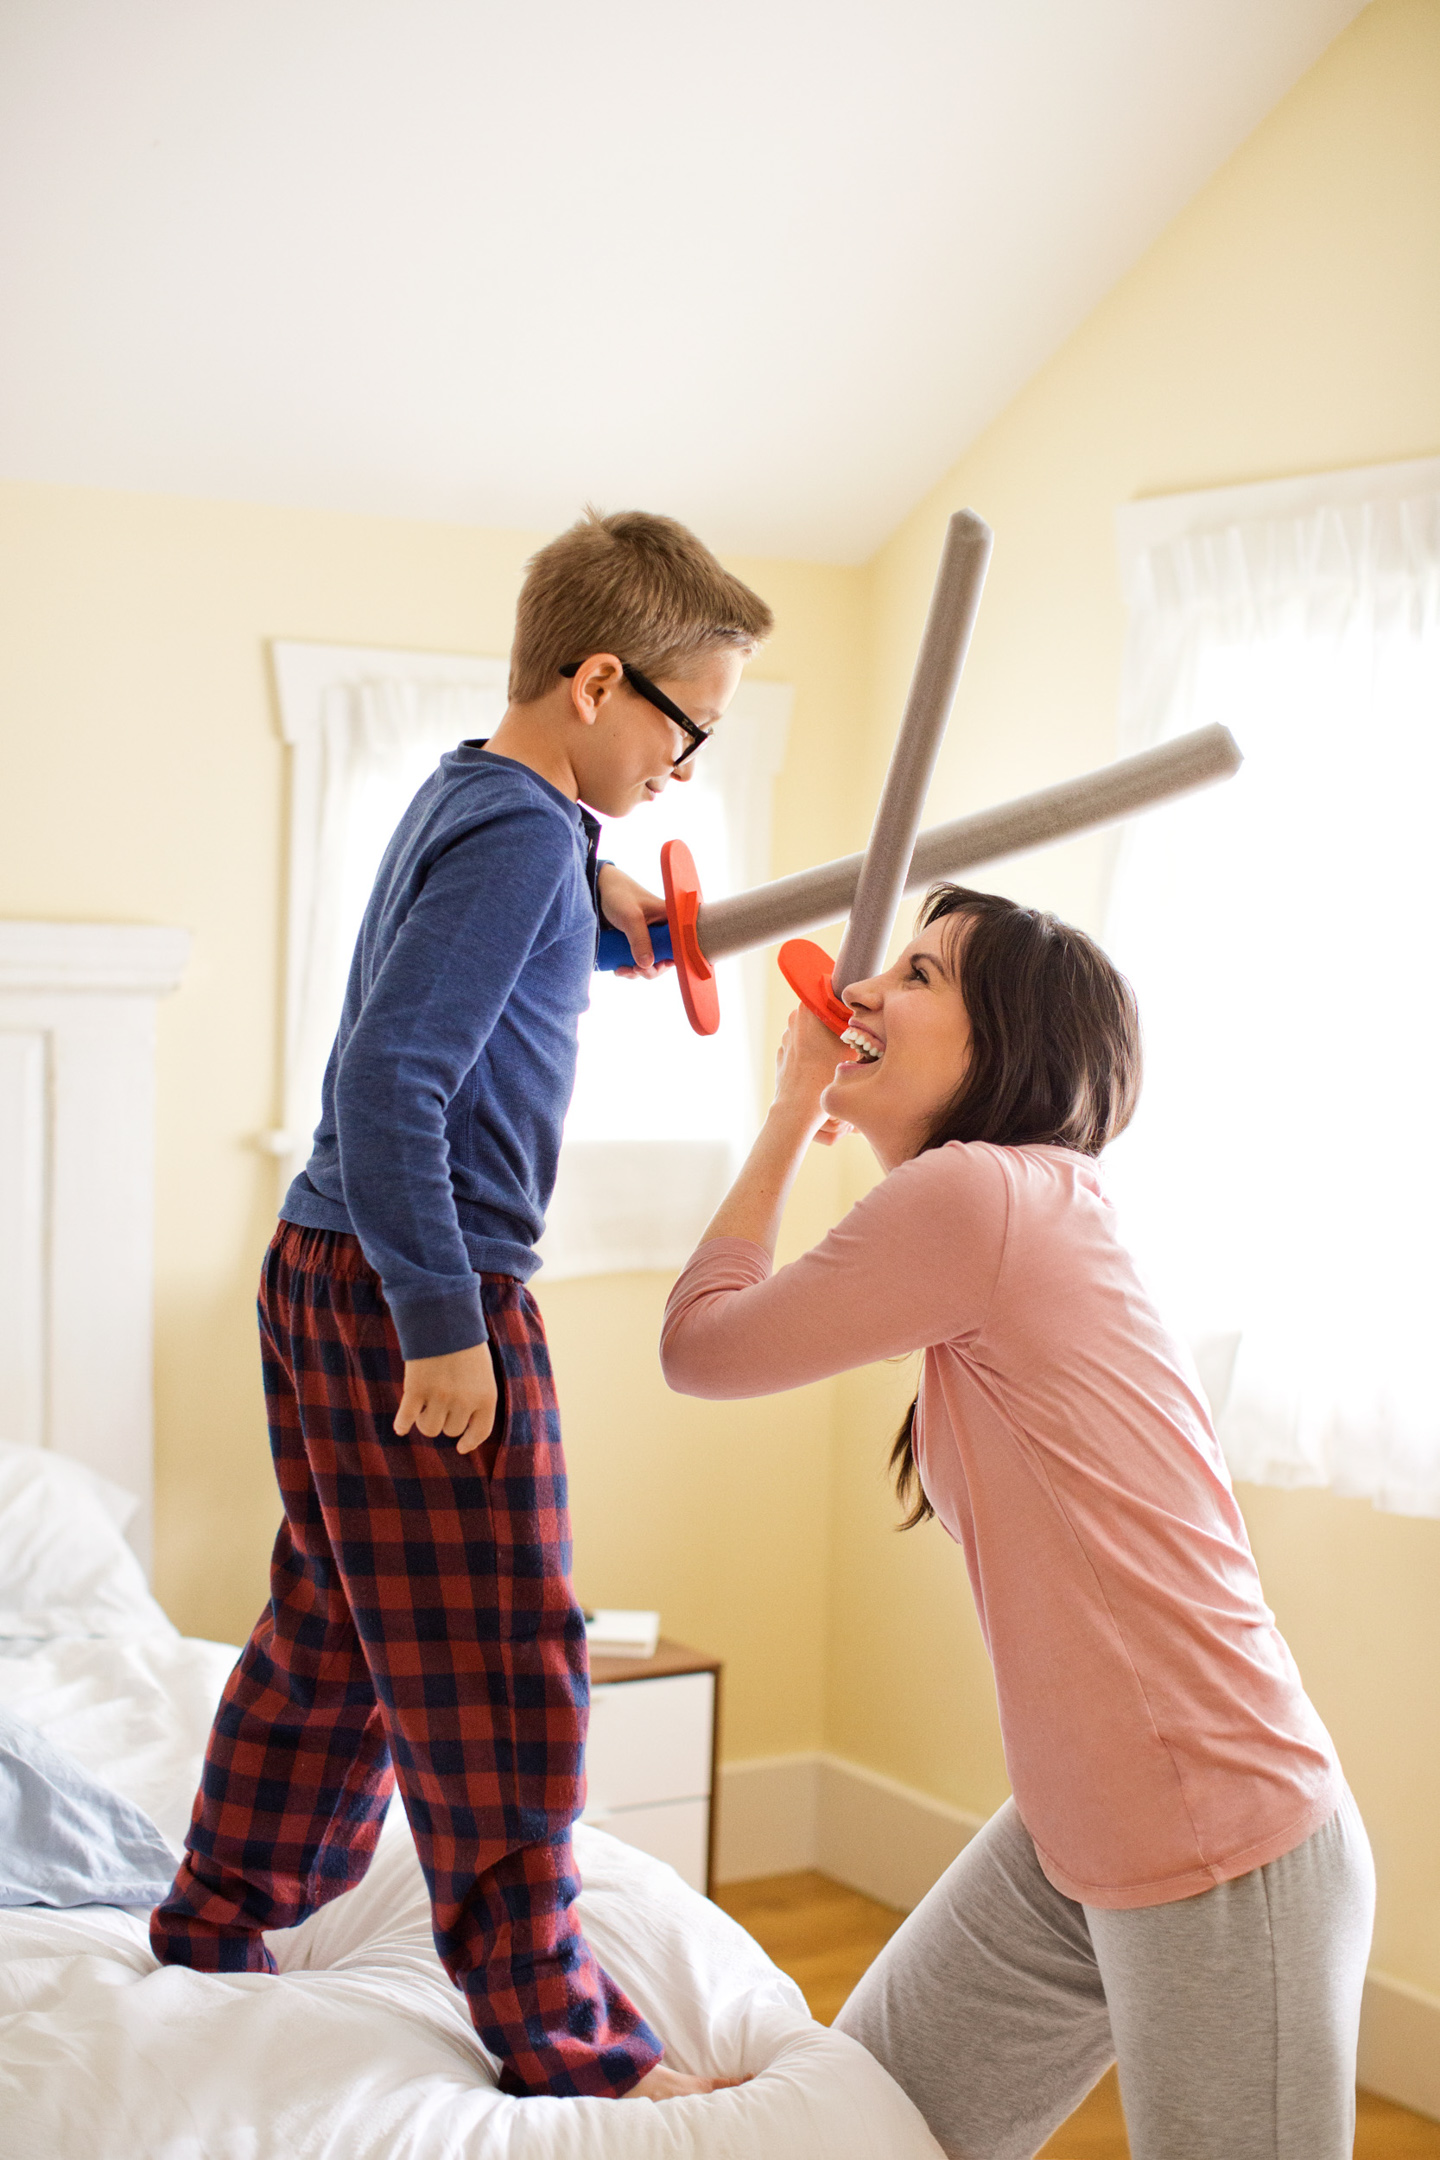 A woman and her son play a game of swords in their bedroom in the morning